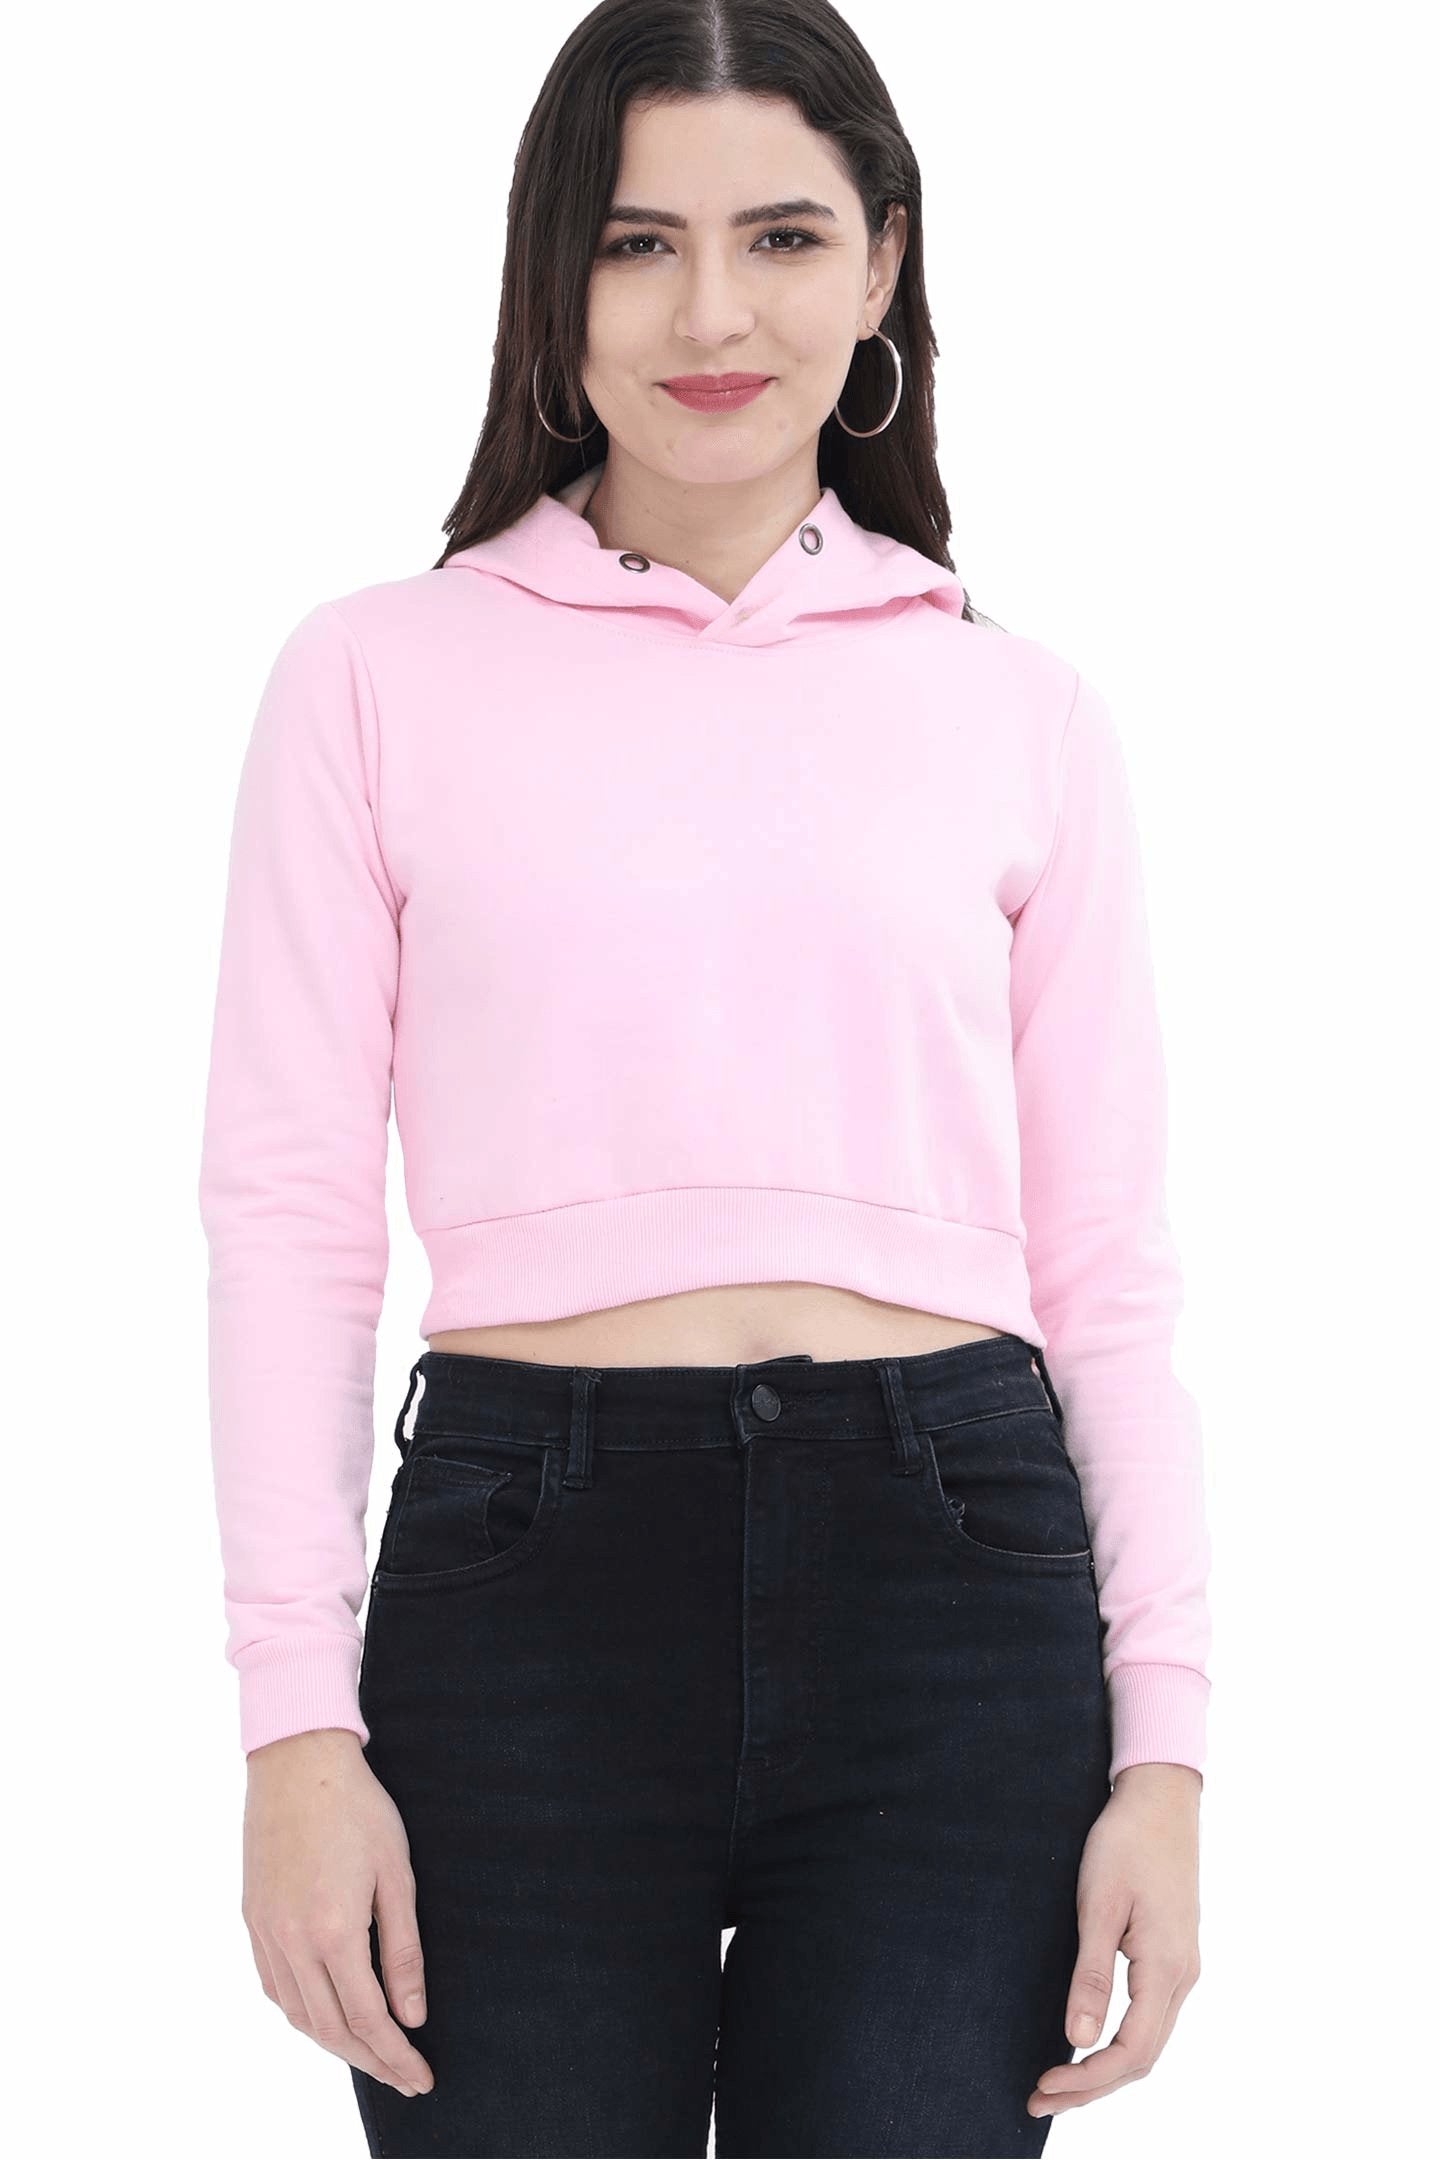 Crop Hoodies - The Vybe Store